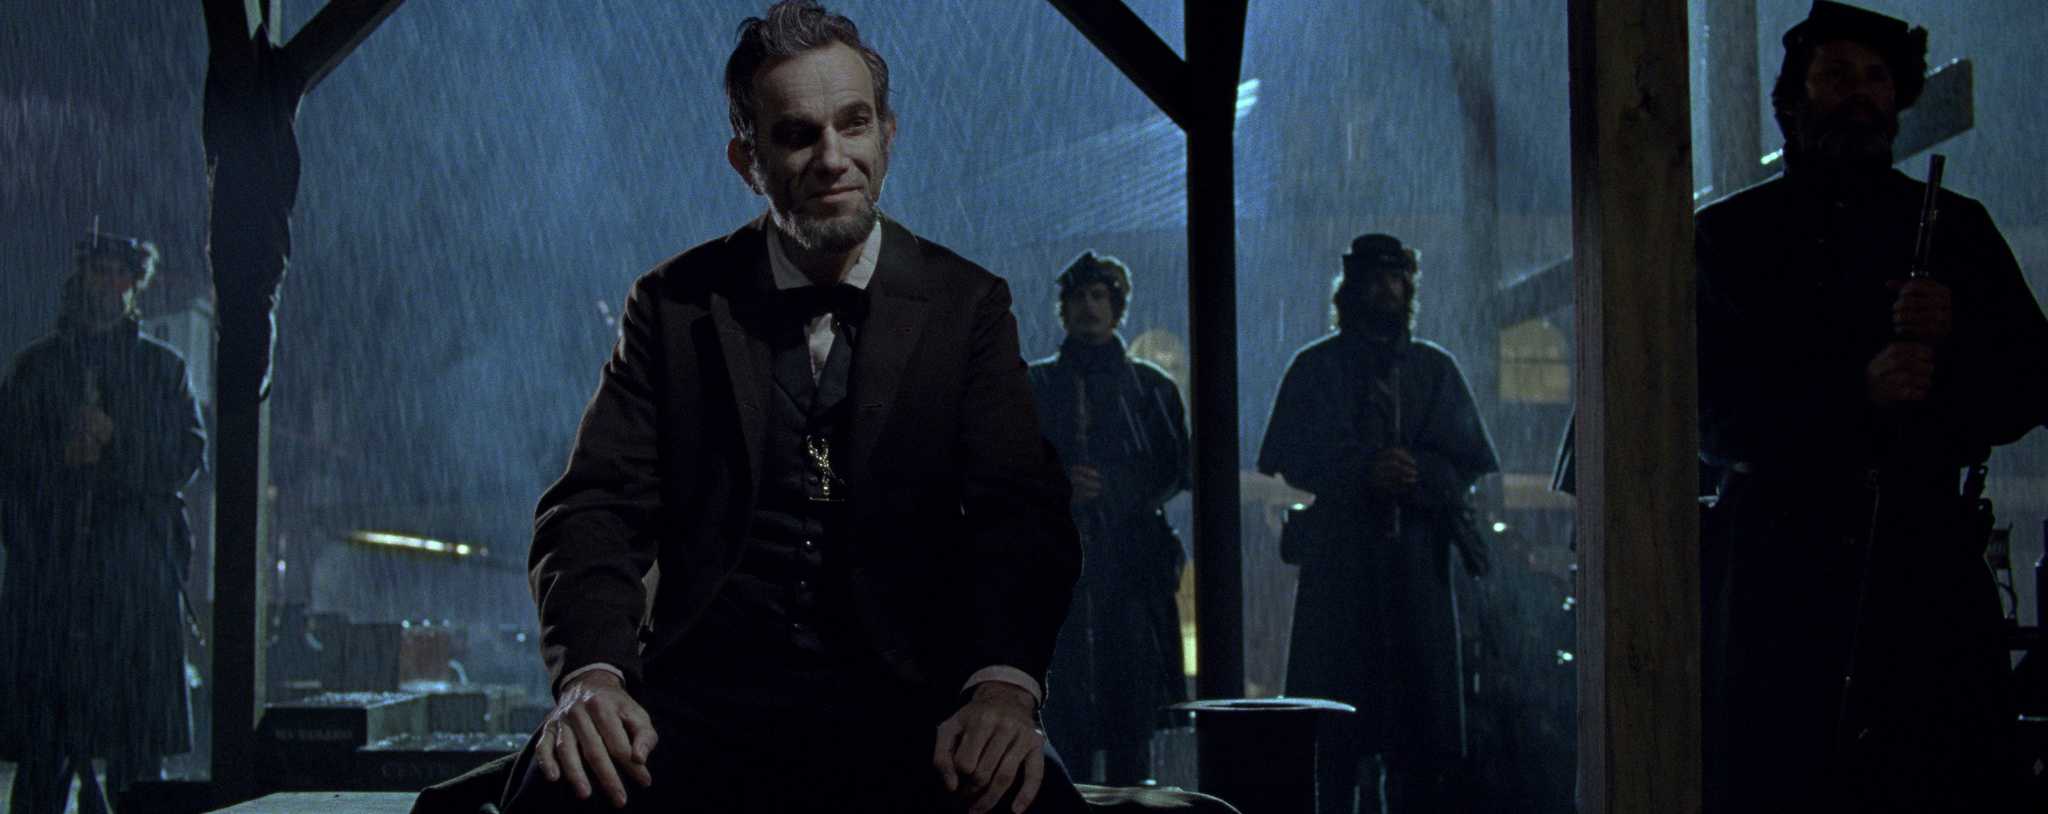 Abraham Lincoln at a rainy battle camp in this photo from DreamWorks Pictures.